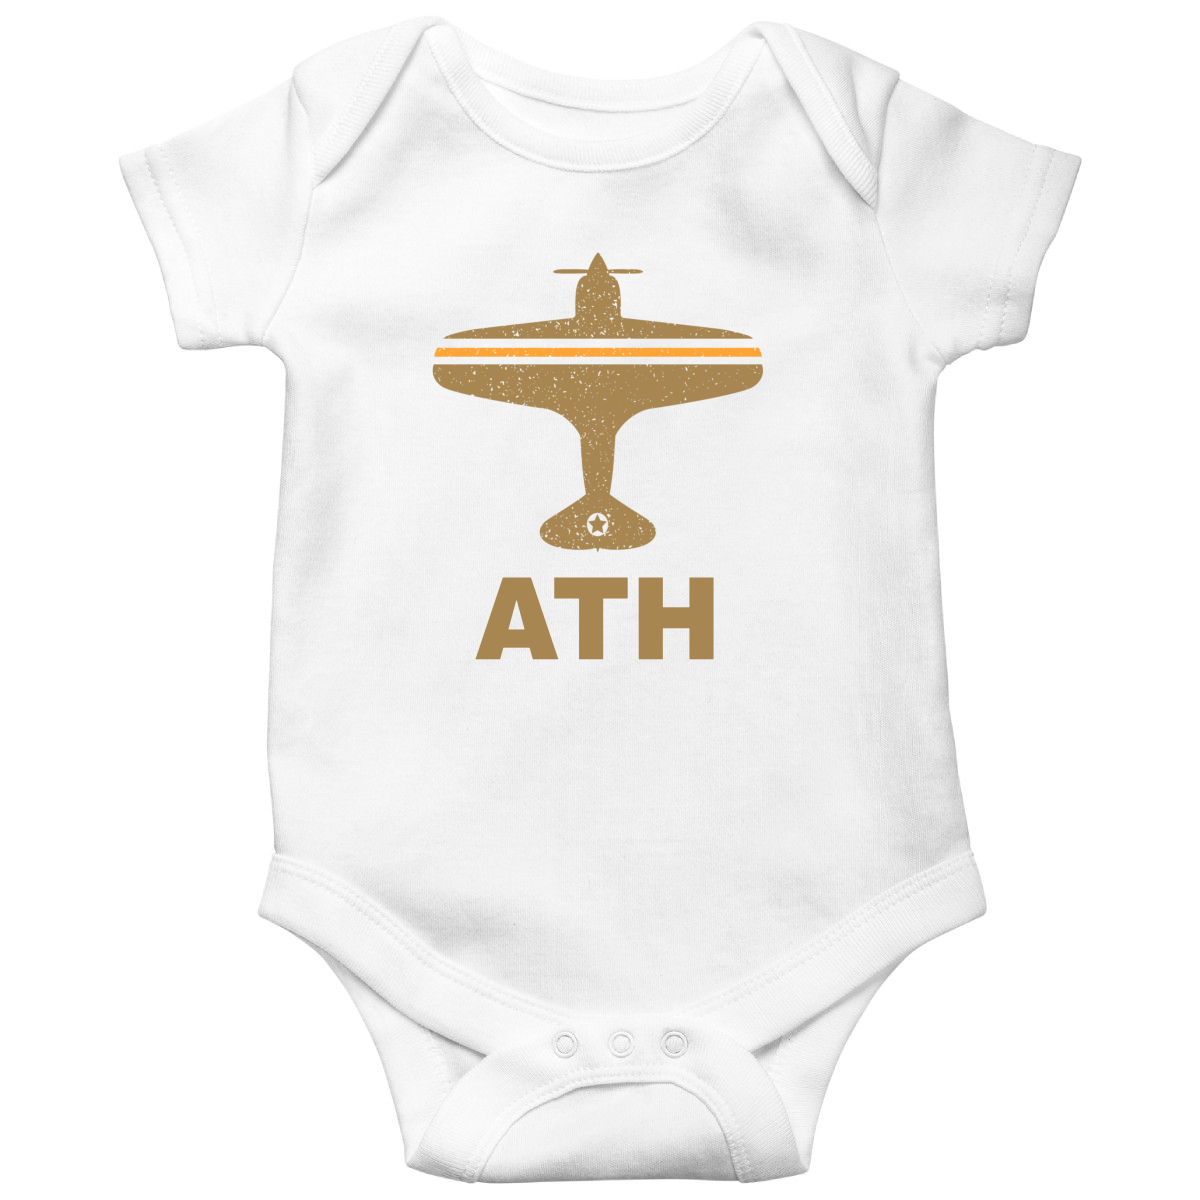 Fly Athens ATH Airport Baby Bodysuits | White